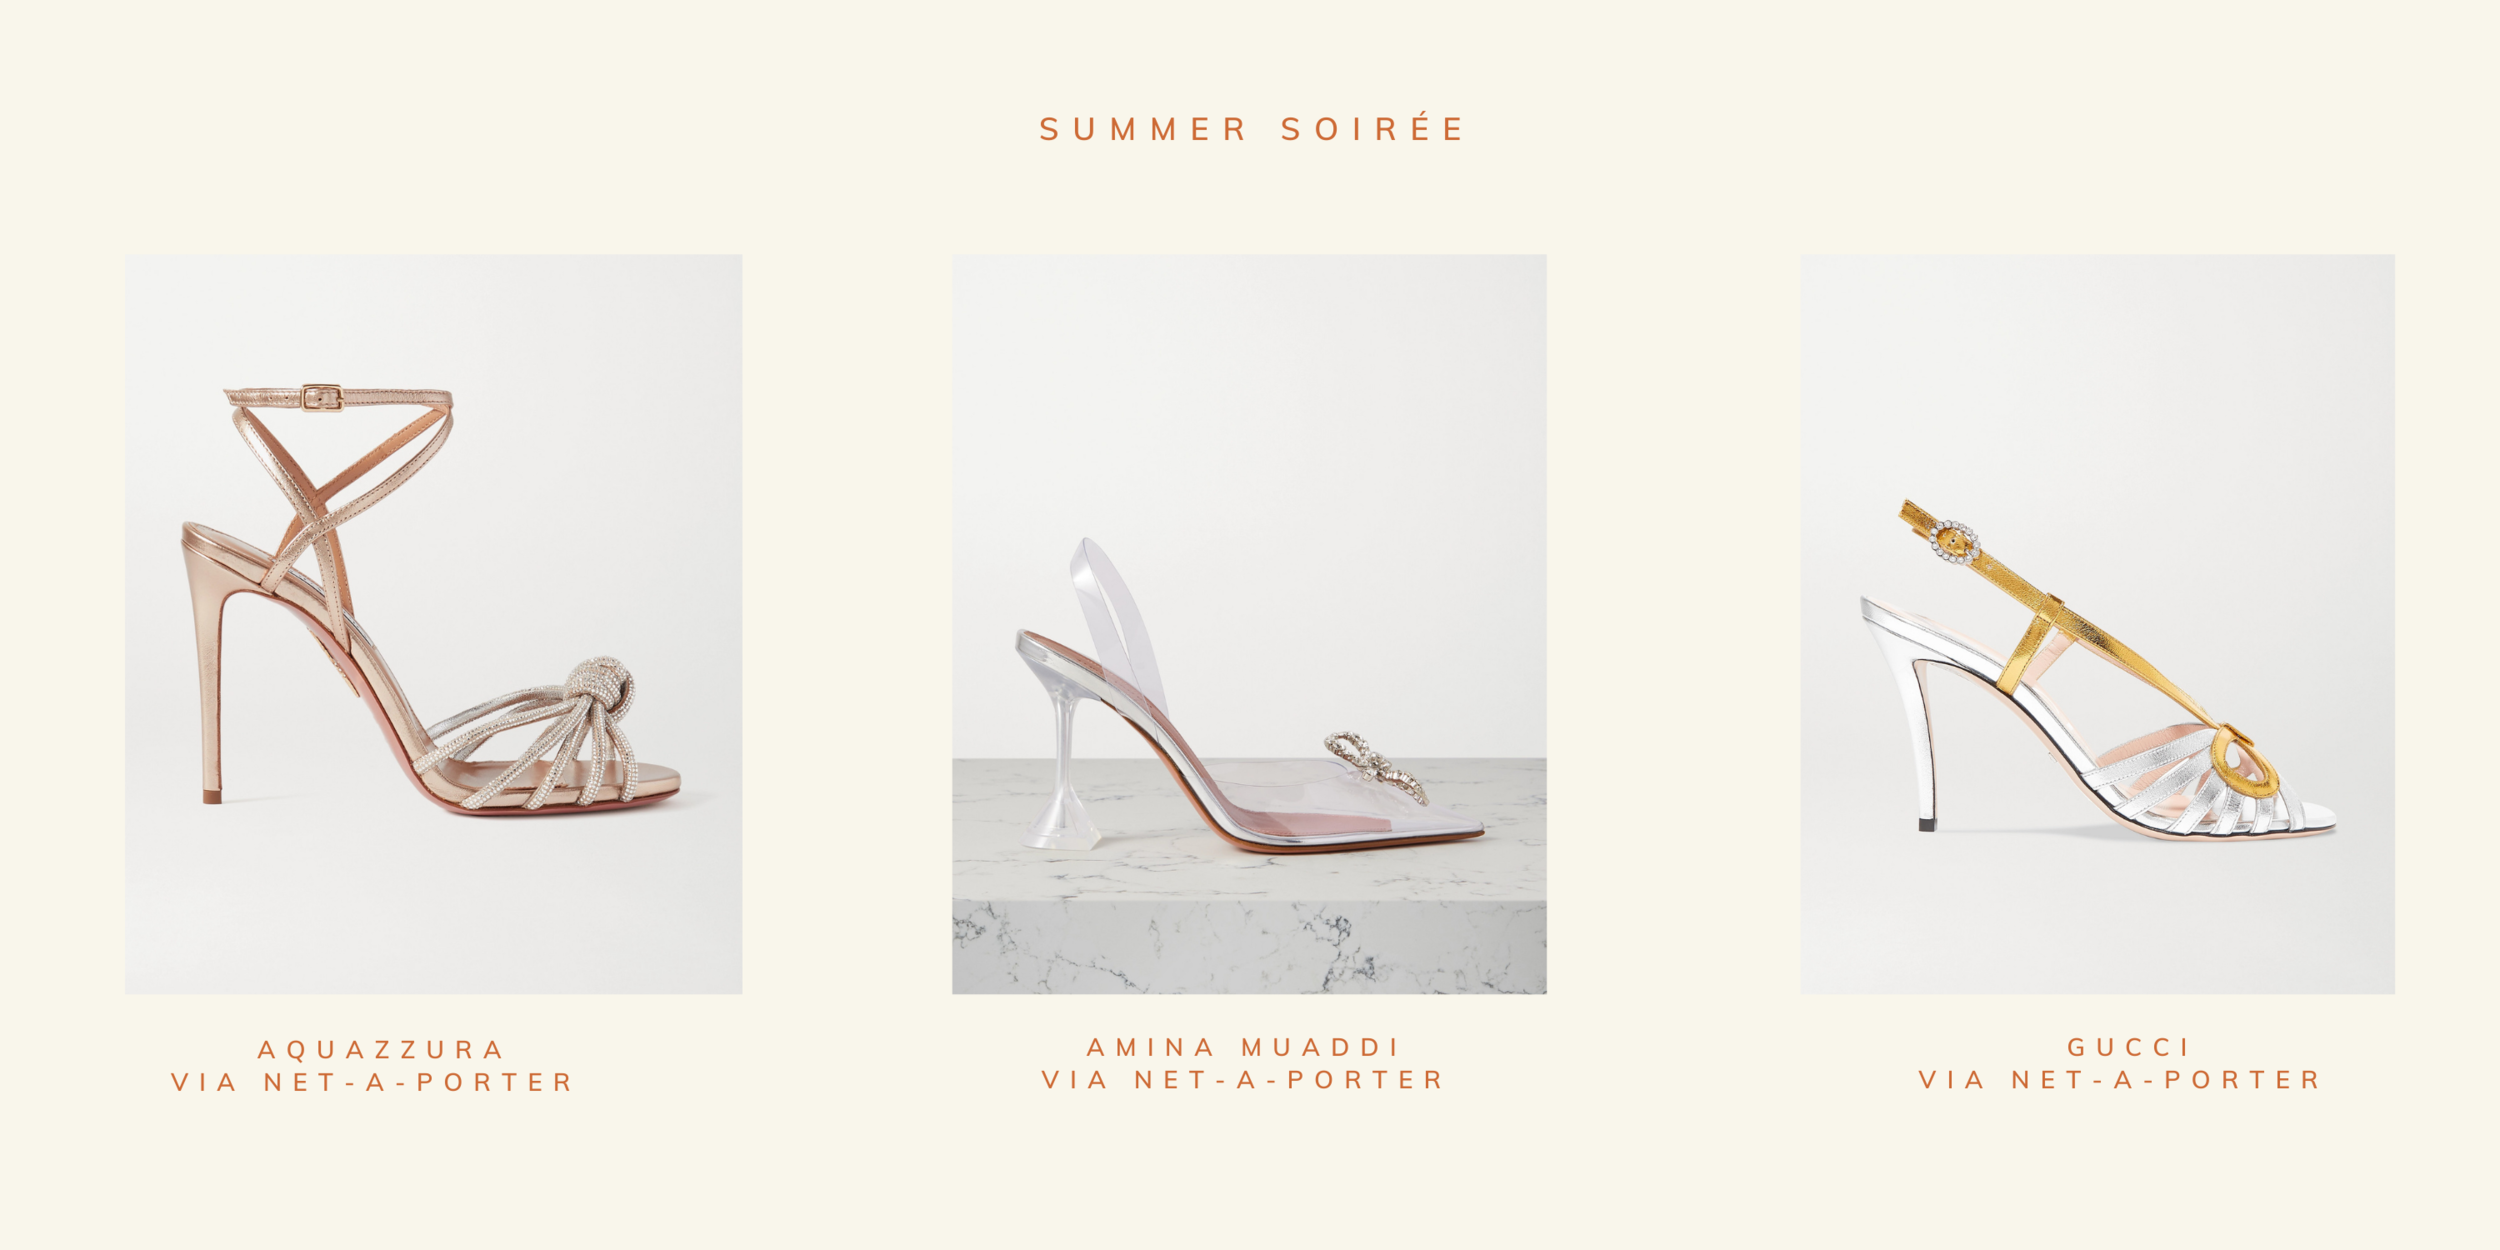 Wedding Shoes We Recommend. #LetoLoves